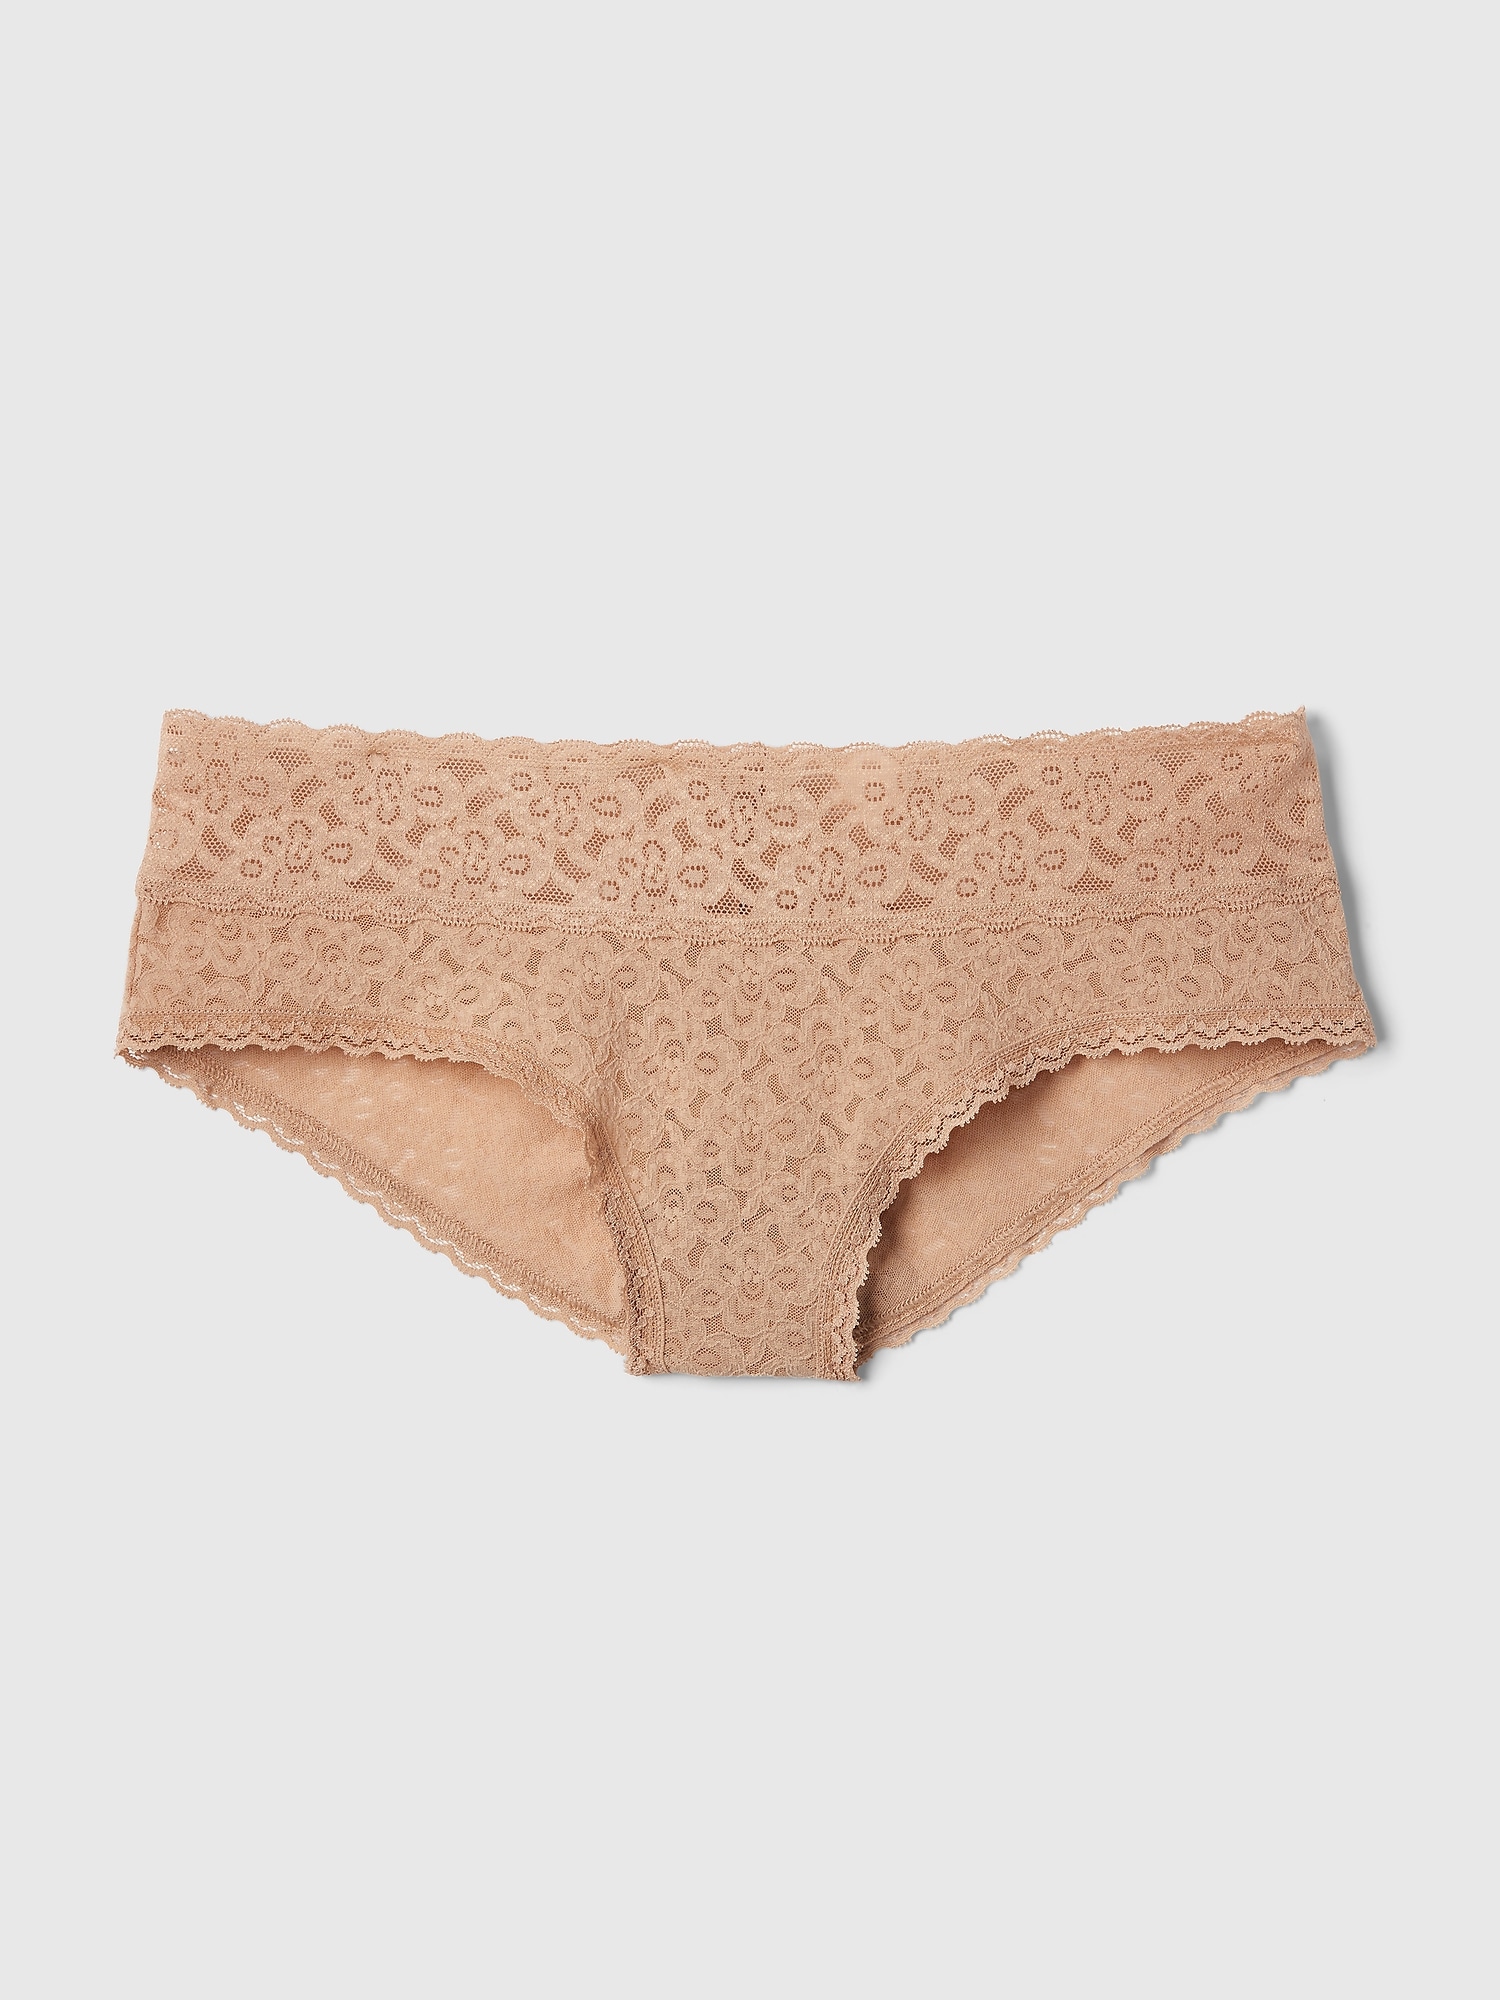 Stretch Lace Cheeky Brief (6-pack)